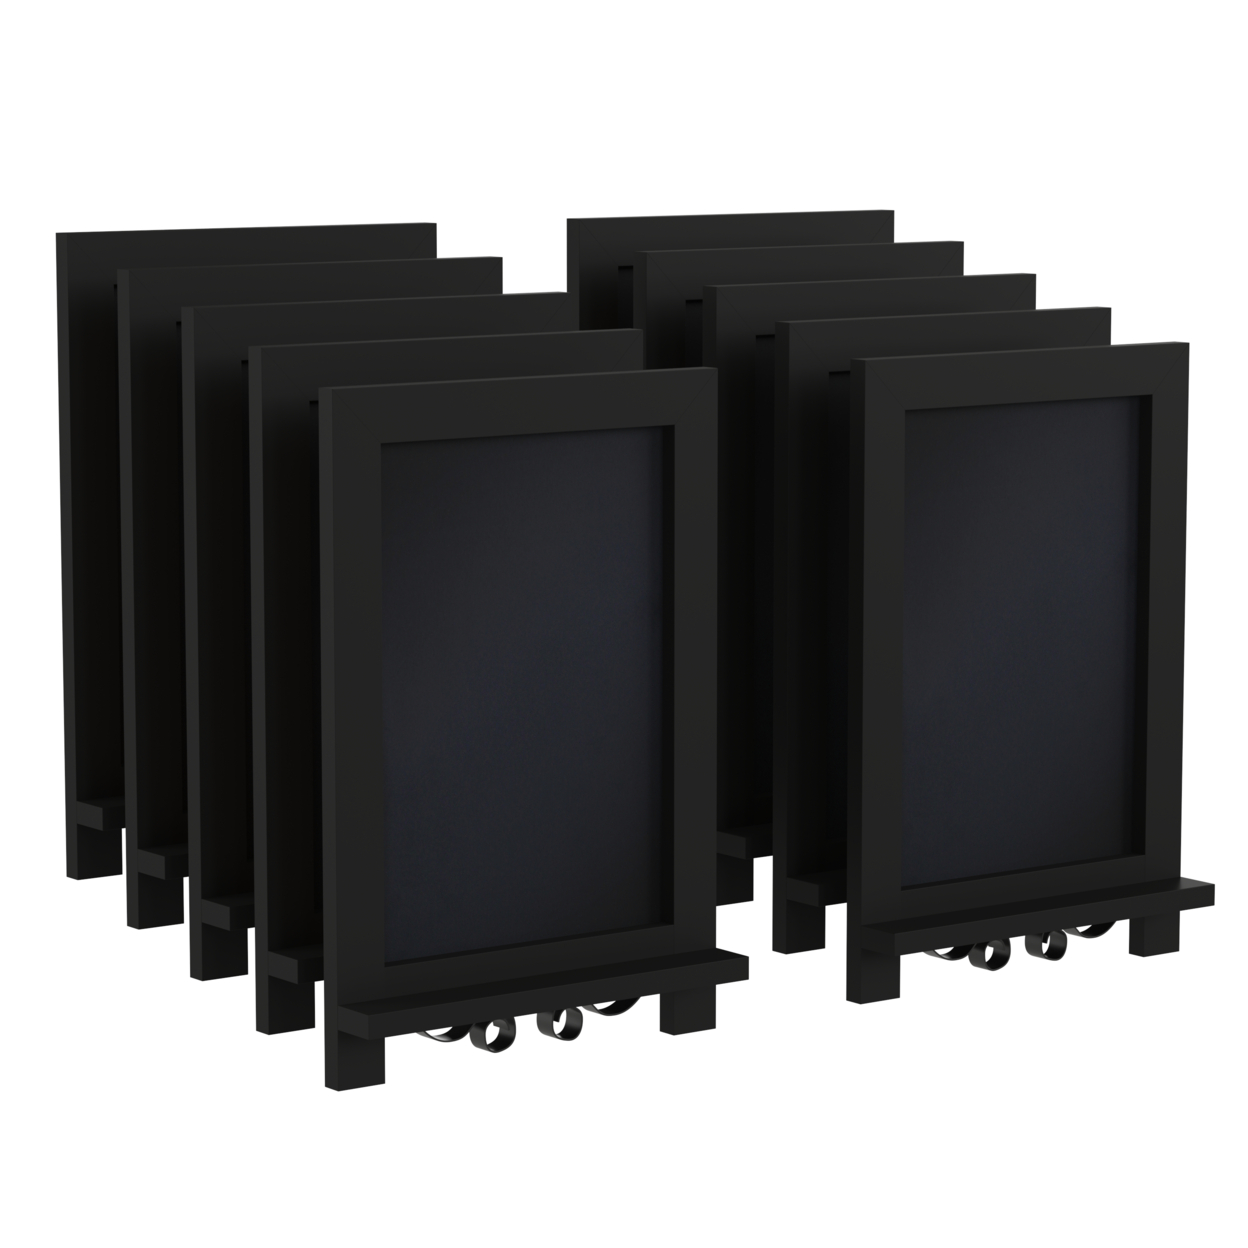 Set Of 10 Classic Magnetic Chalkboard With Scrolled Metal Legs, Black Wood